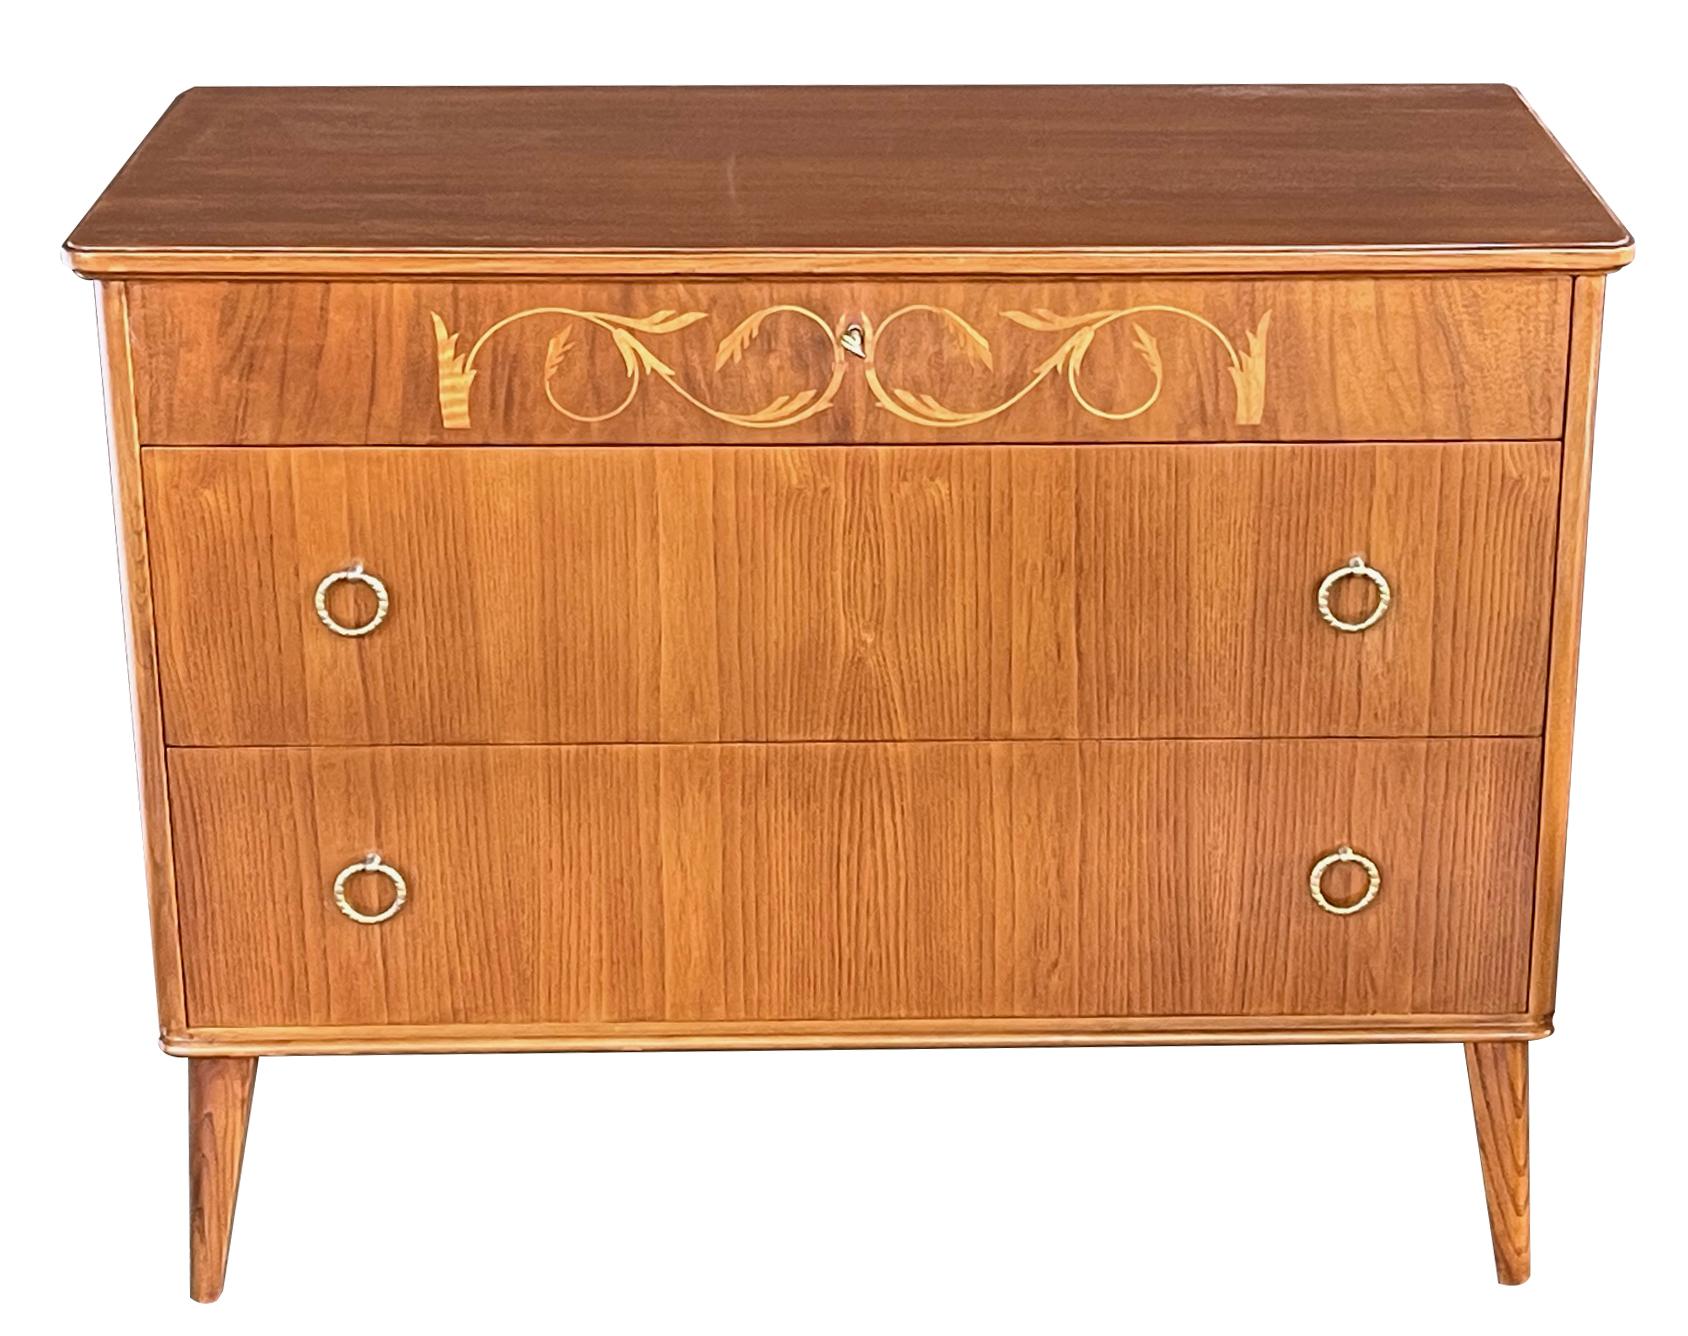 Mid-20th Century Mid-Century Modern Marquetry Inlaid Birch Chest of Drawers, Possibly Swedish For Sale